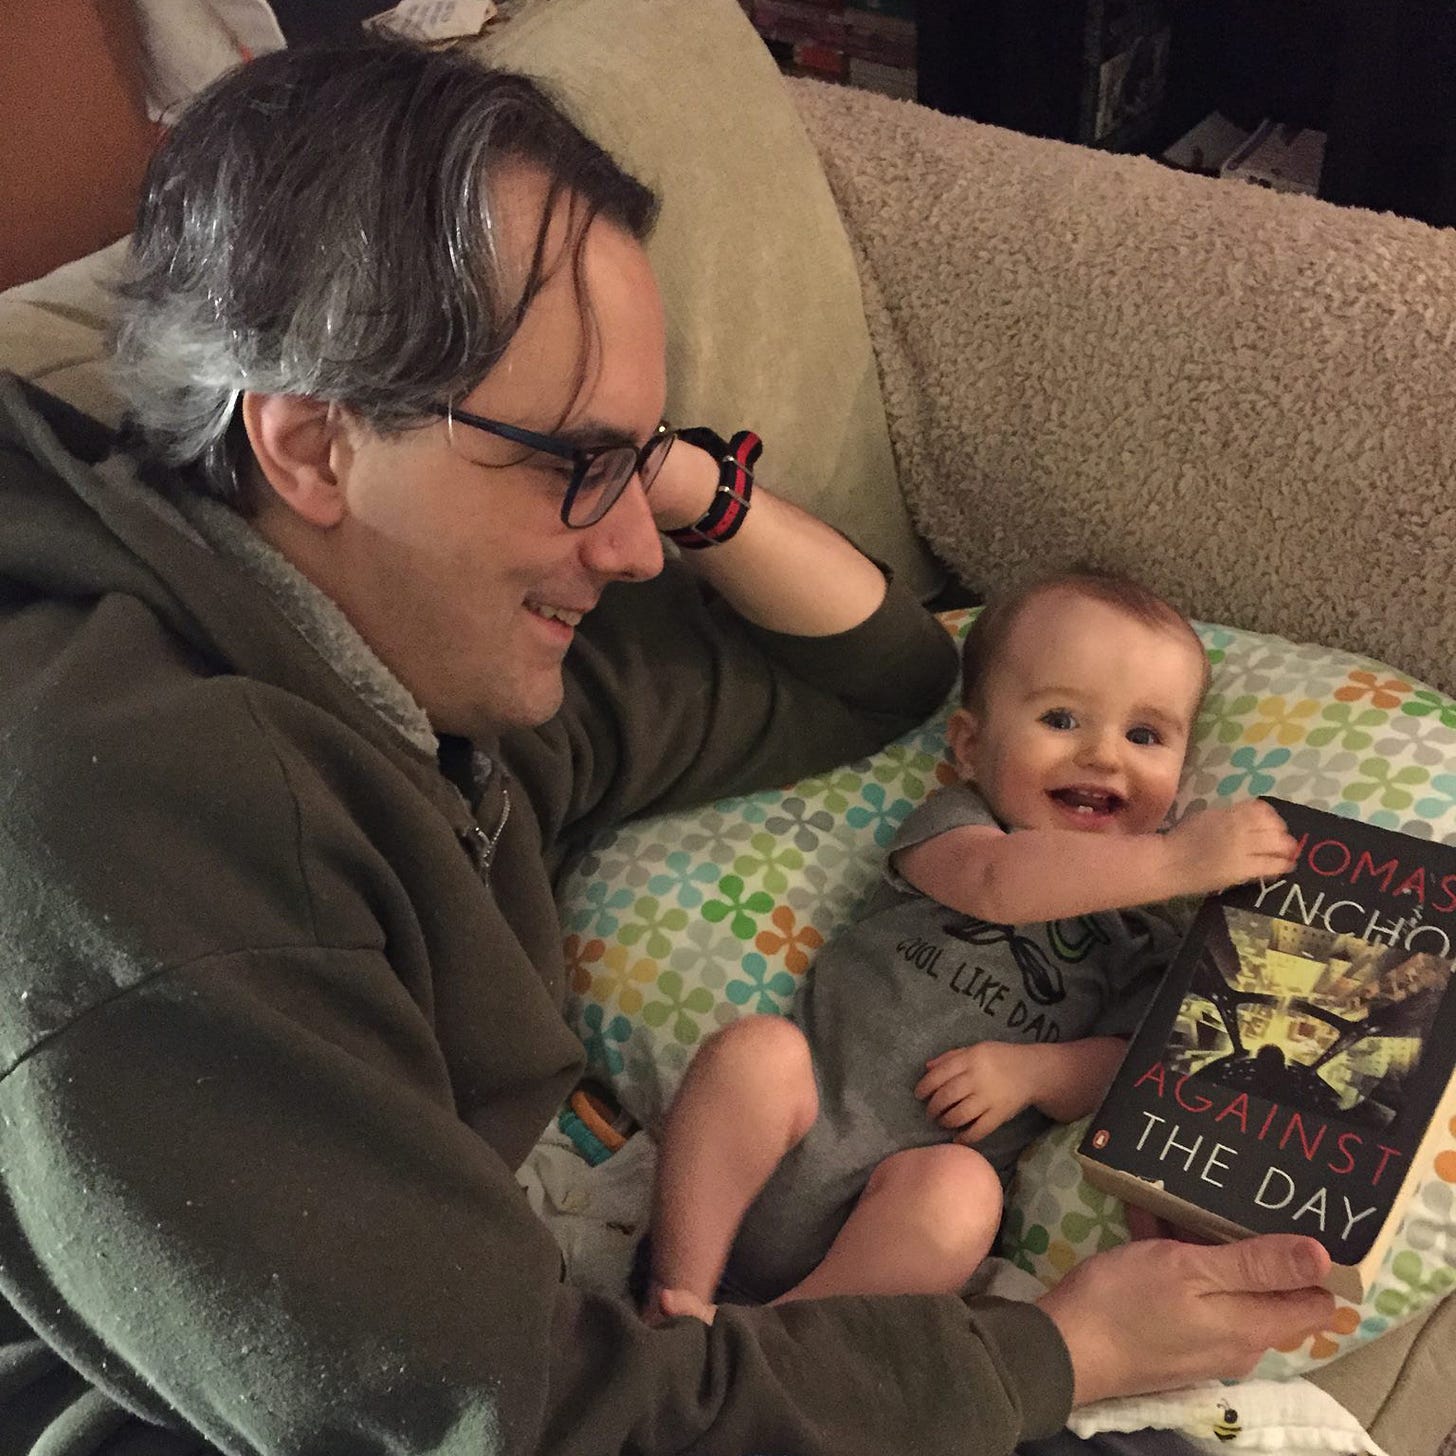 The newsletter author with his eight month old son, smiling, next to a paperback copy of Against the Day by Thomas Pynchon.